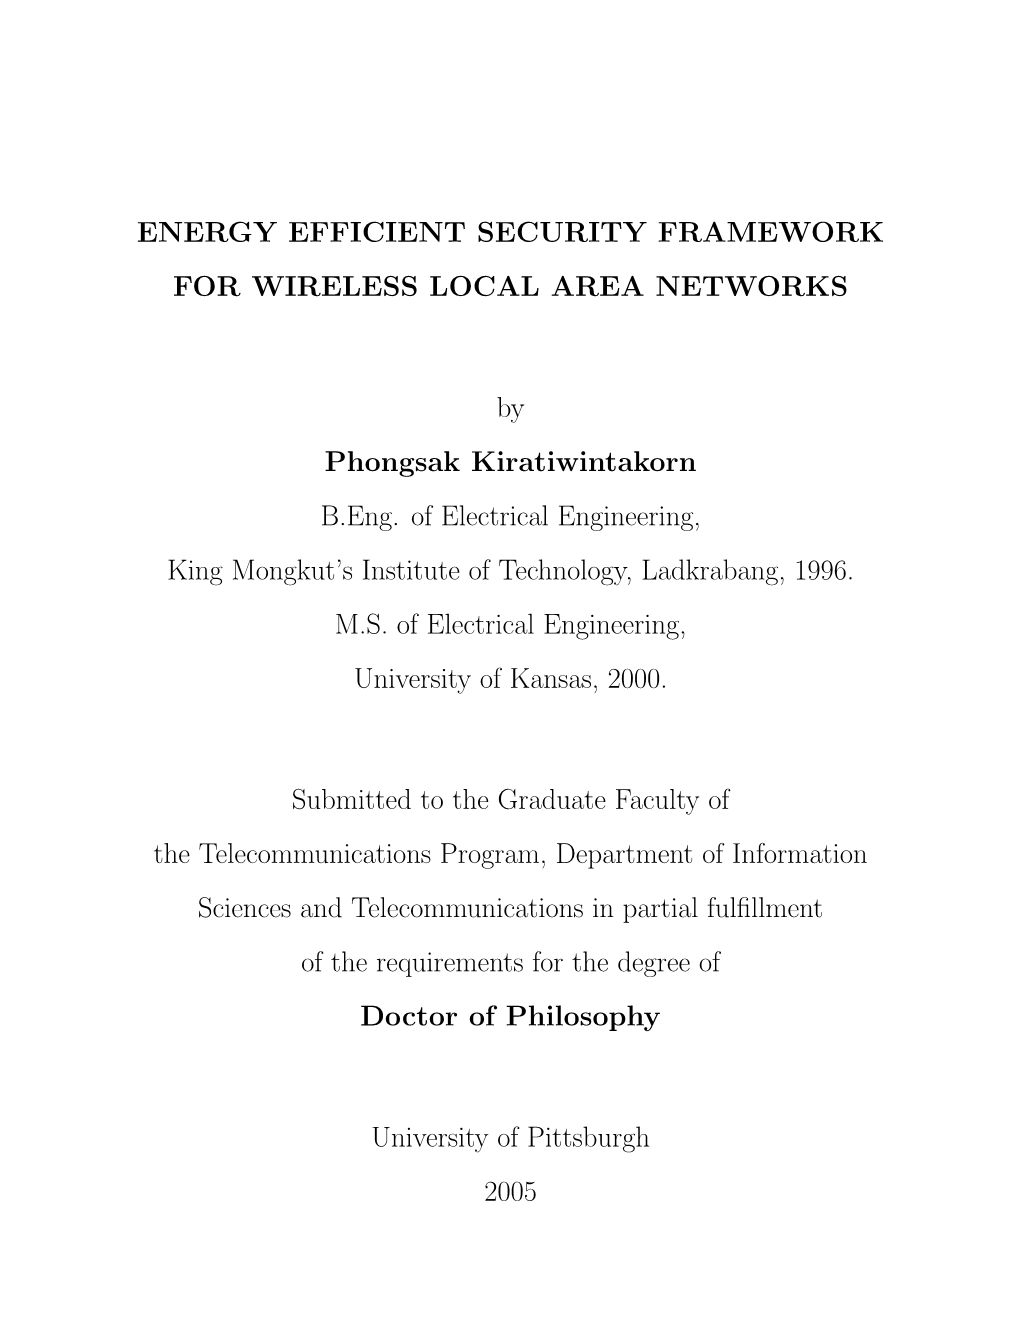 Energy Efficient Security Framework for Wireless Local Area Networks